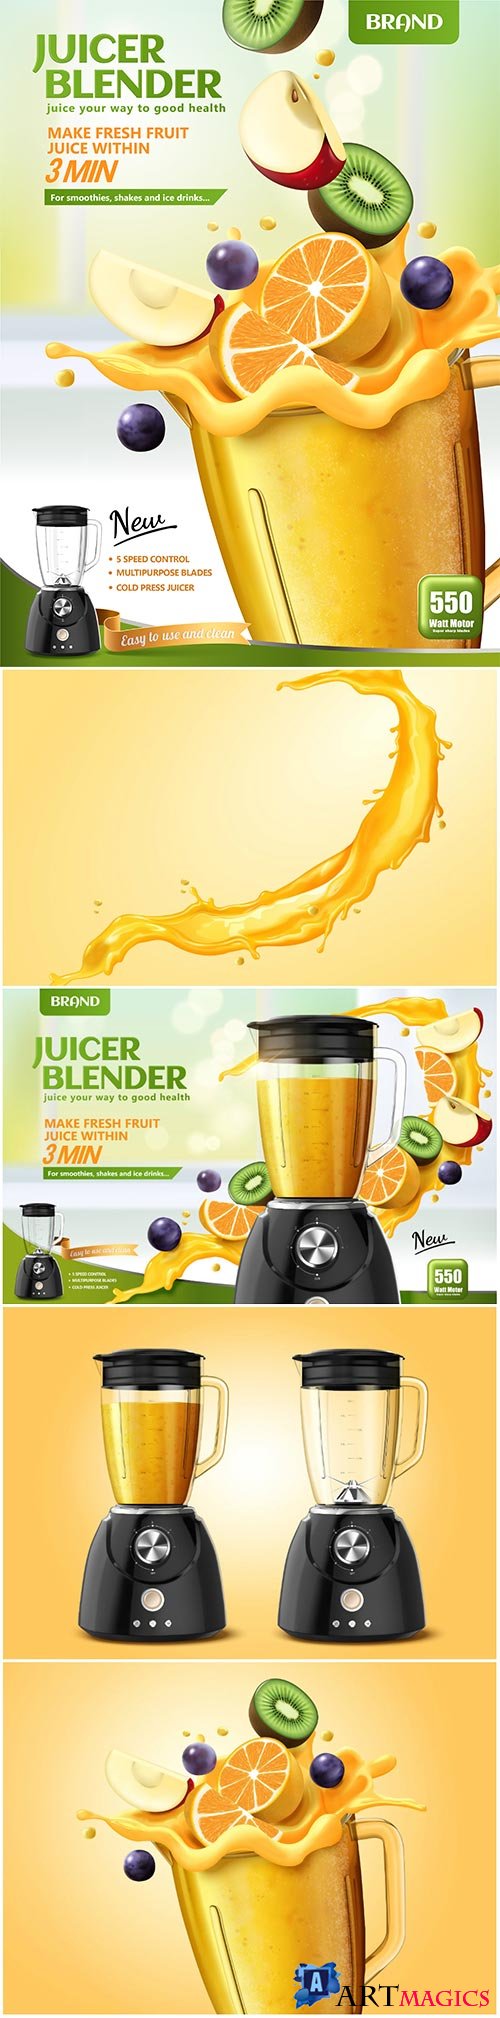 Juicer blender ads with fresh sliced fruits dropping in container, 3d vector illustration